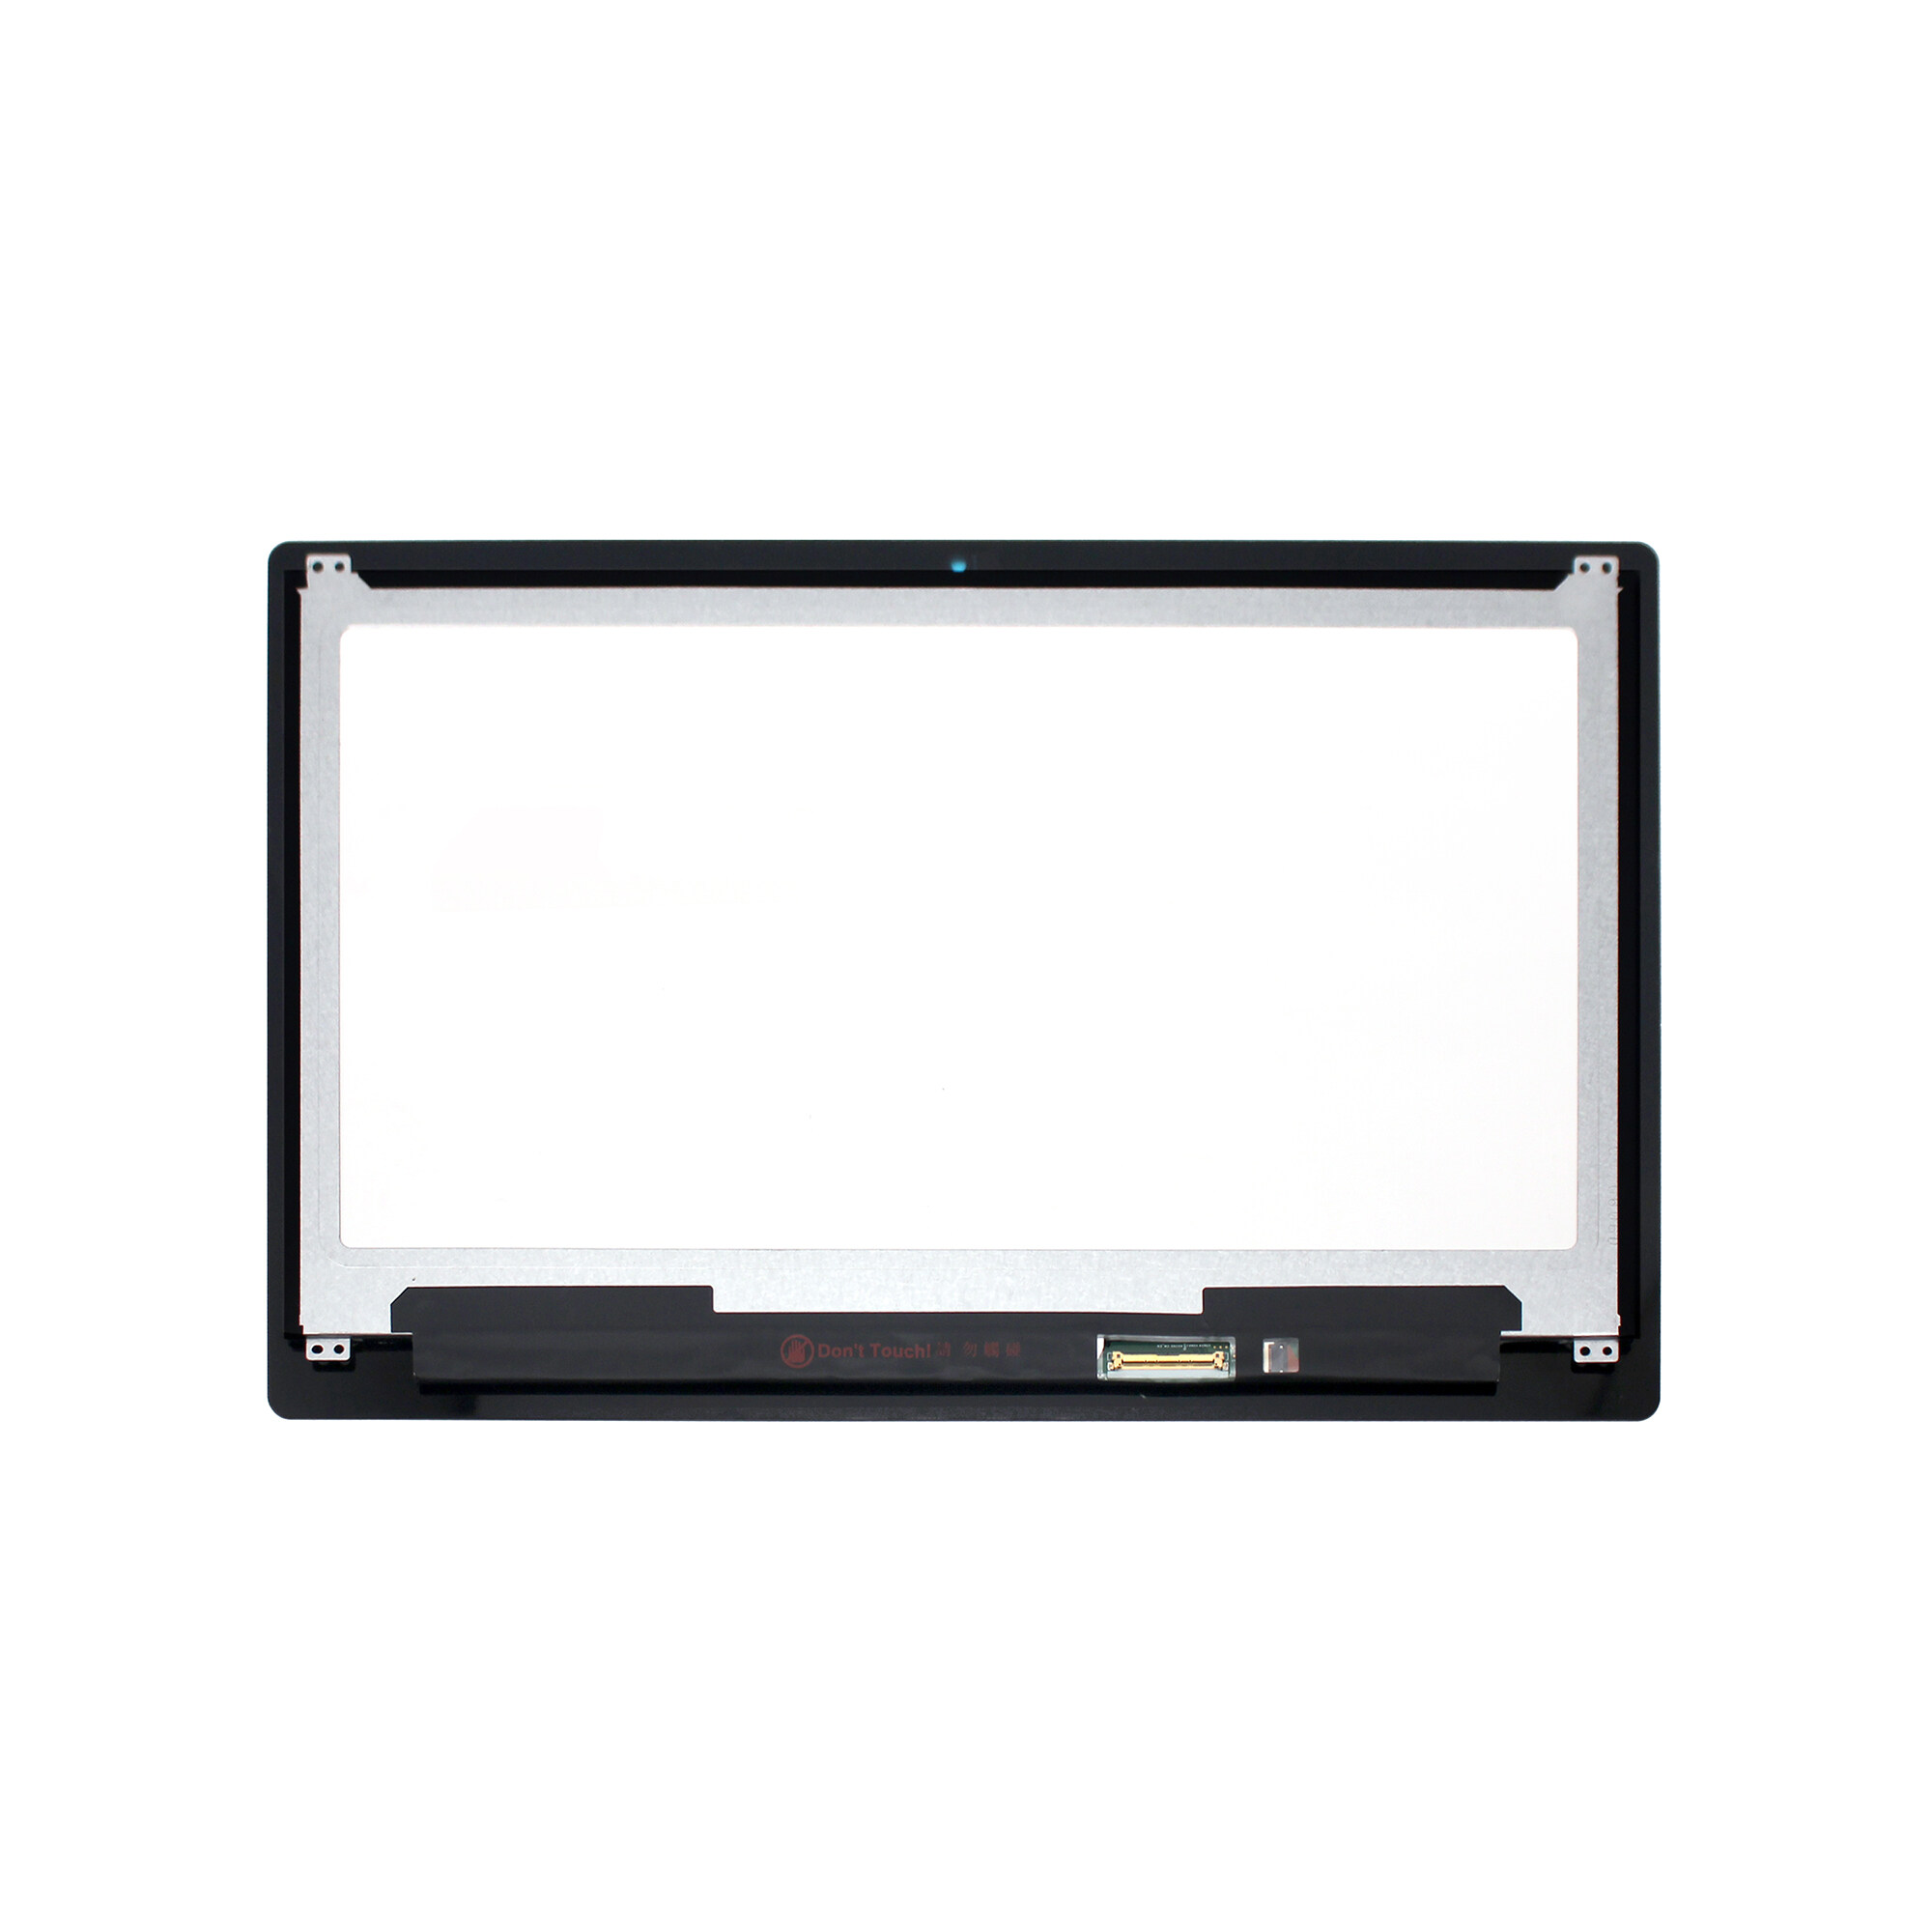 13.3" FHD LED LCD Touchscreen Digitizer Display Assembly for Acer Spin 5 SP513-51